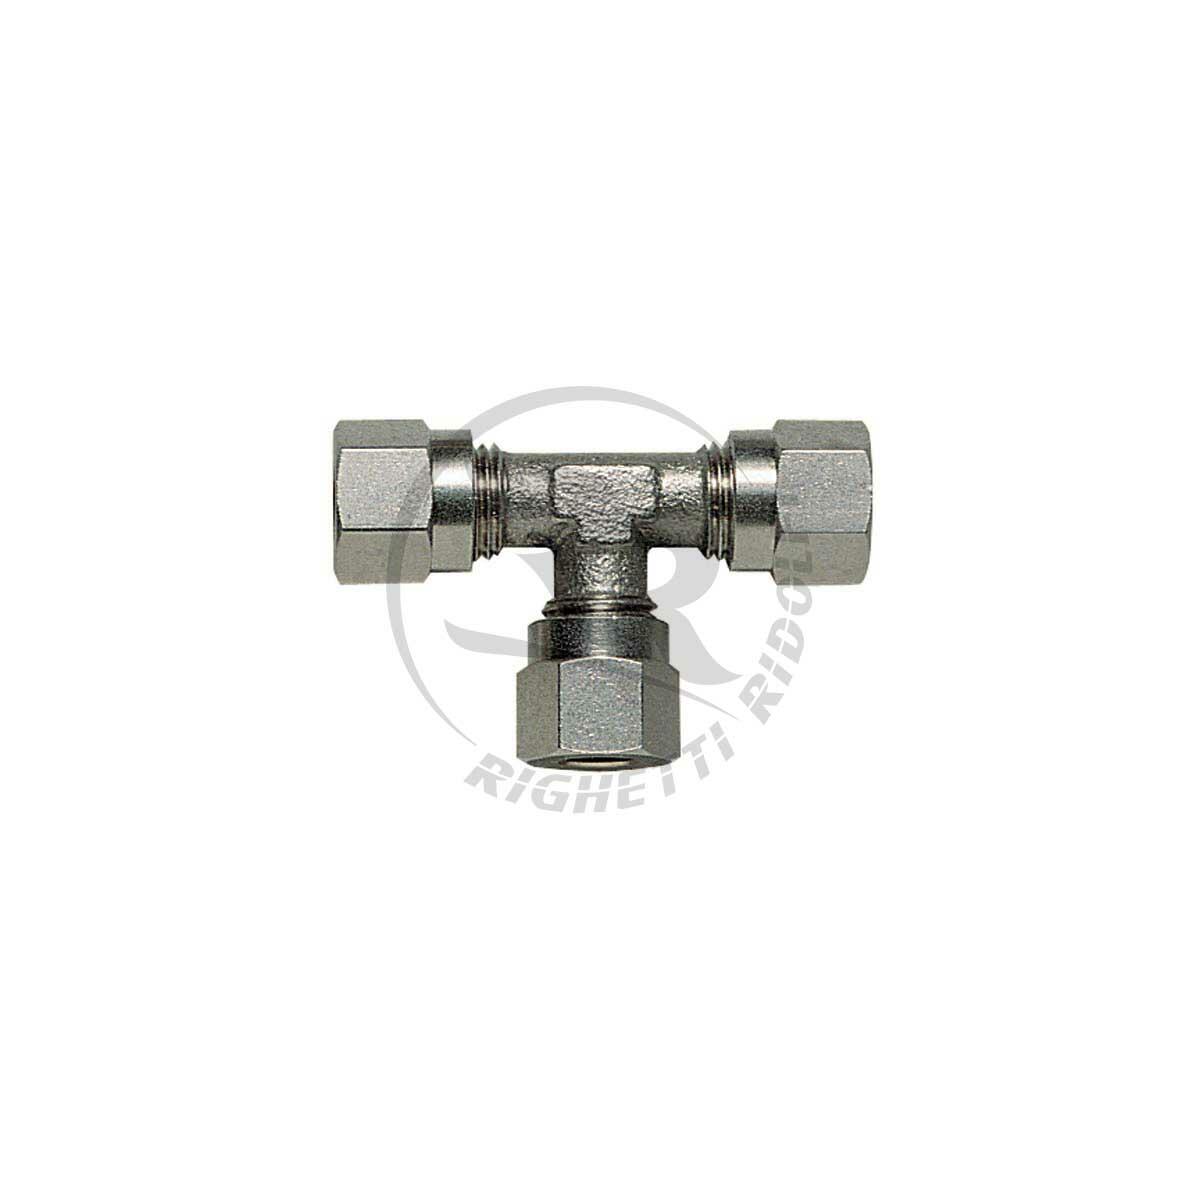 T Piece Connector For Braided Brake Pipe 3 Way Flow